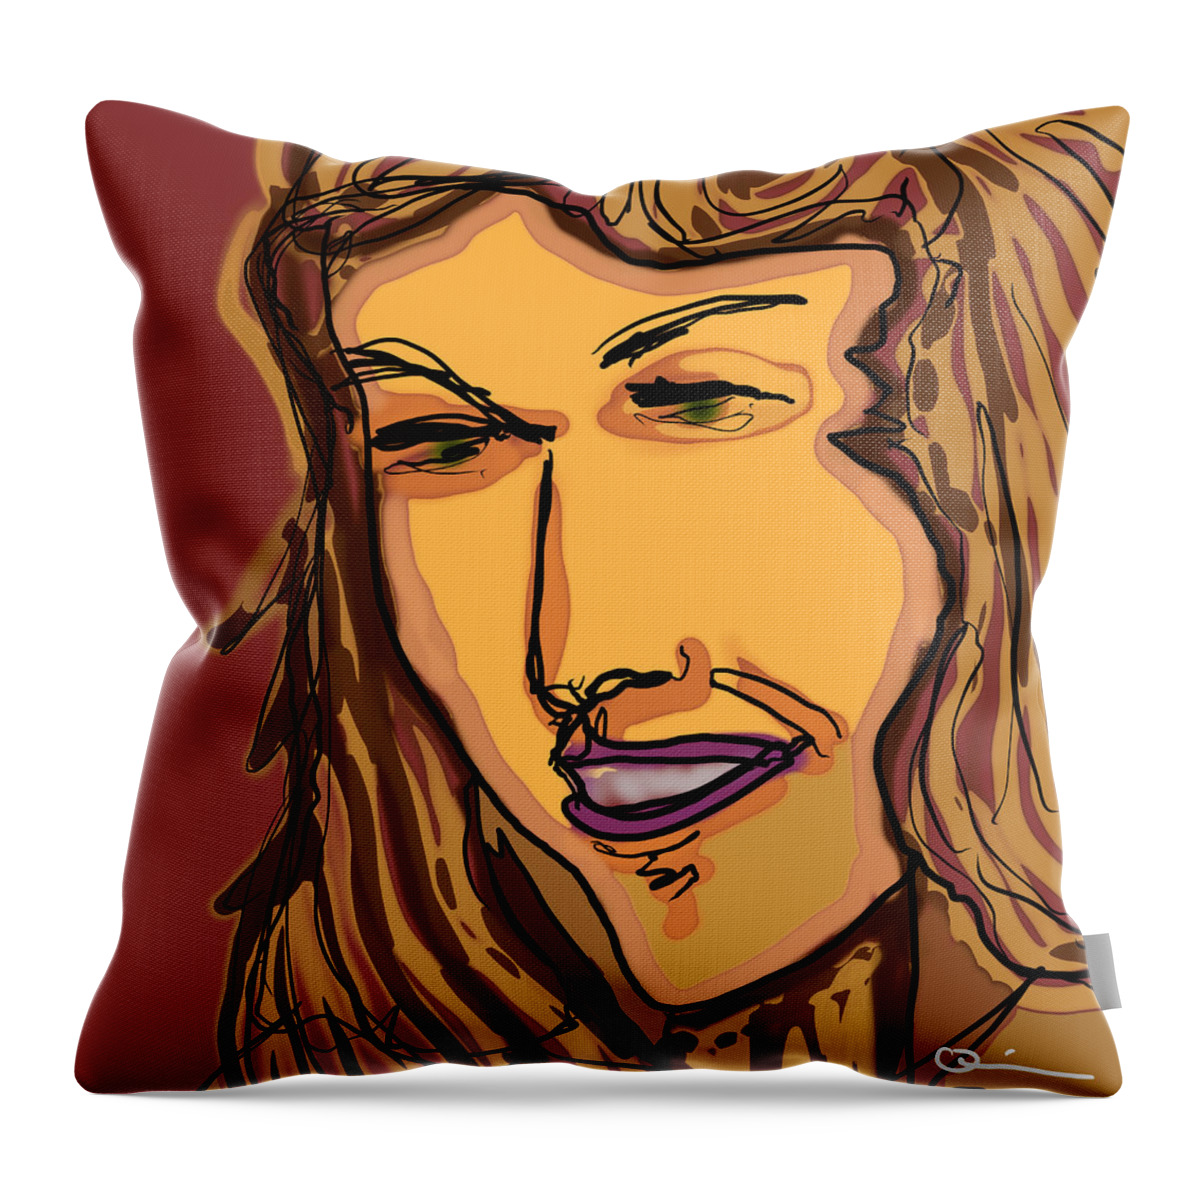 Quiros Throw Pillow featuring the digital art Laugh by Jeffrey Quiros